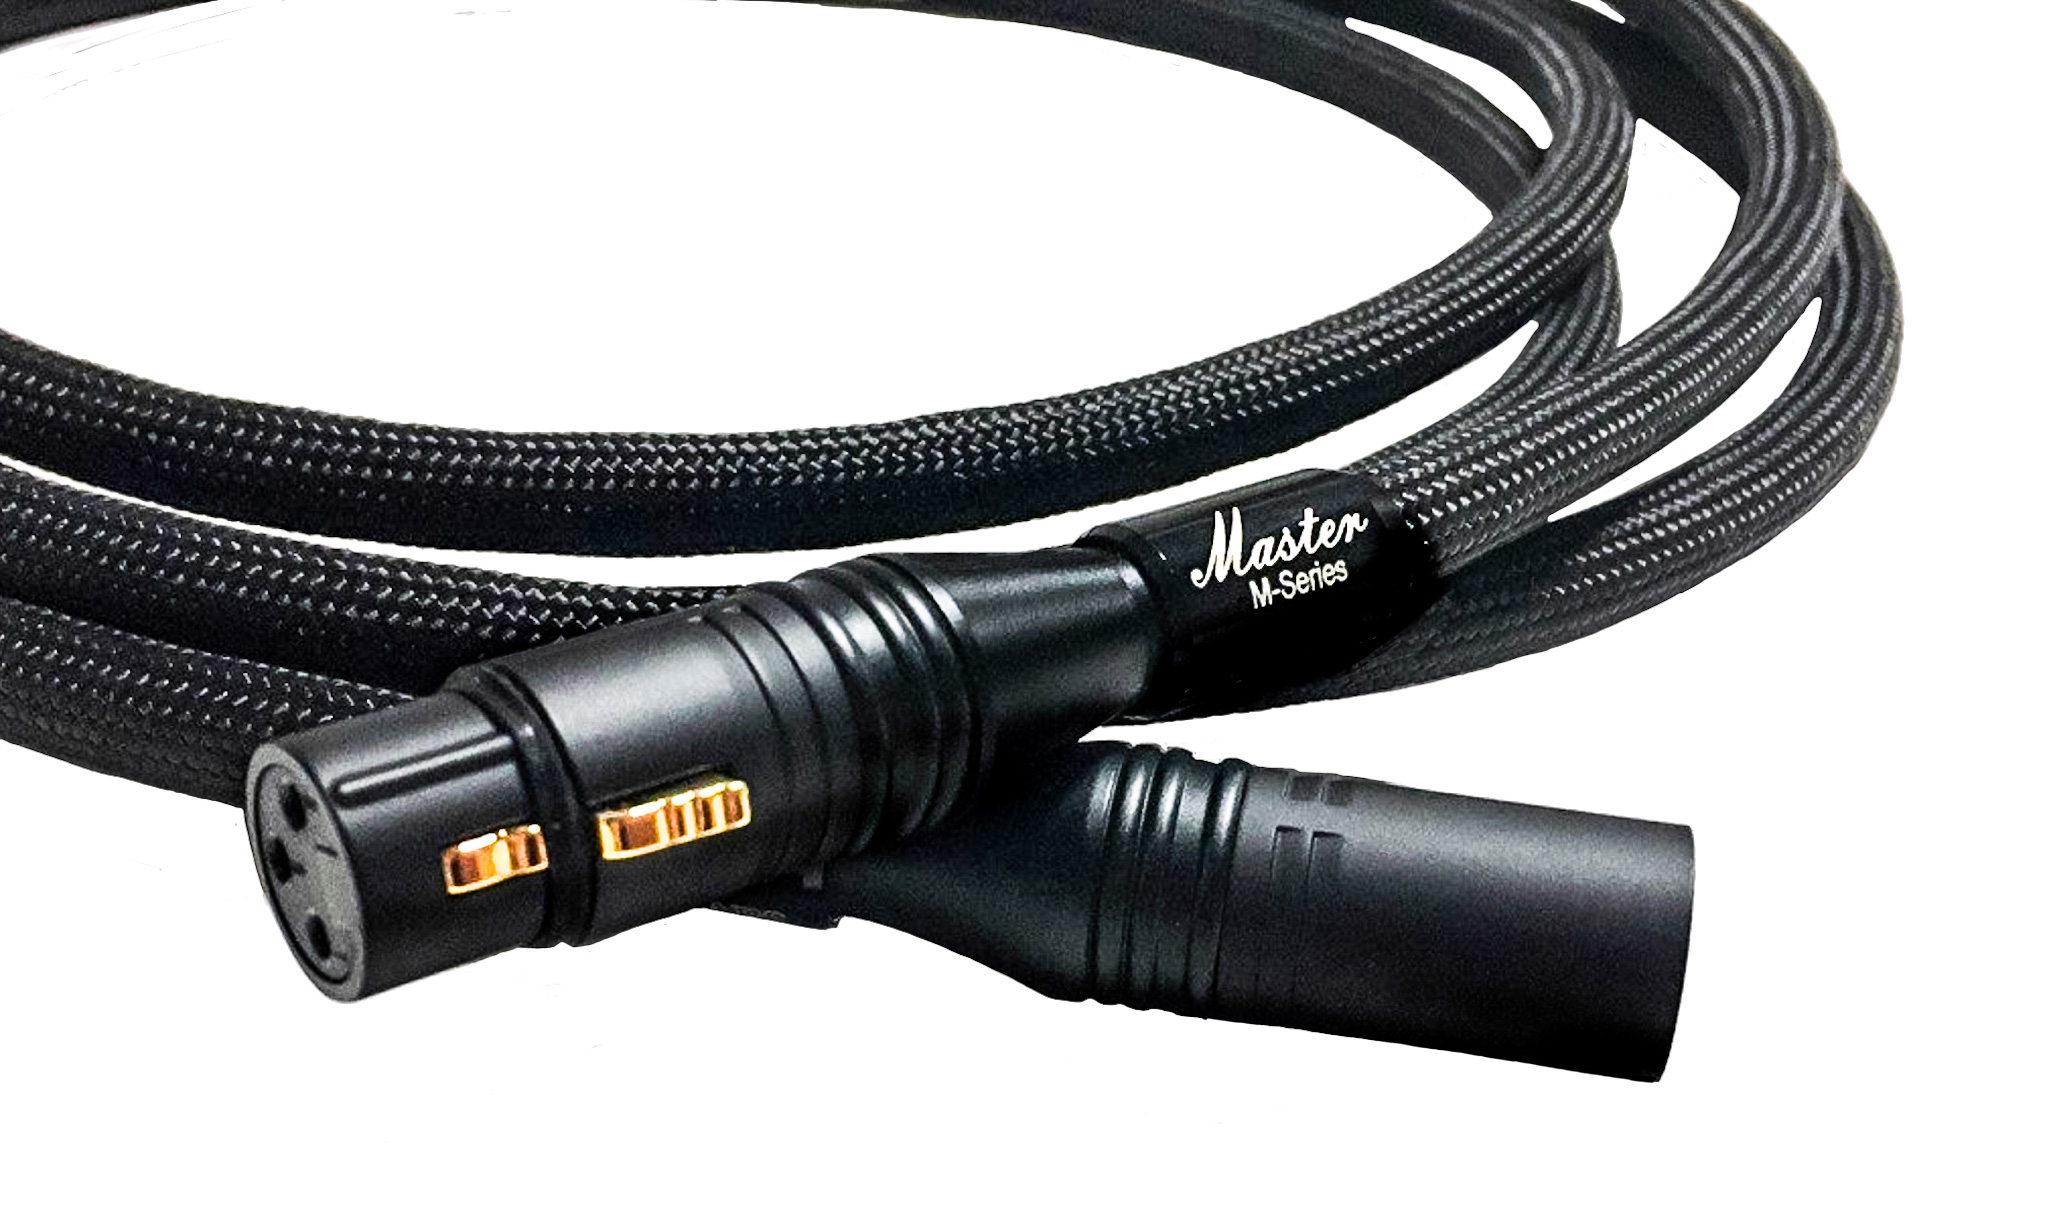 The Master M-Series Microphone Cable